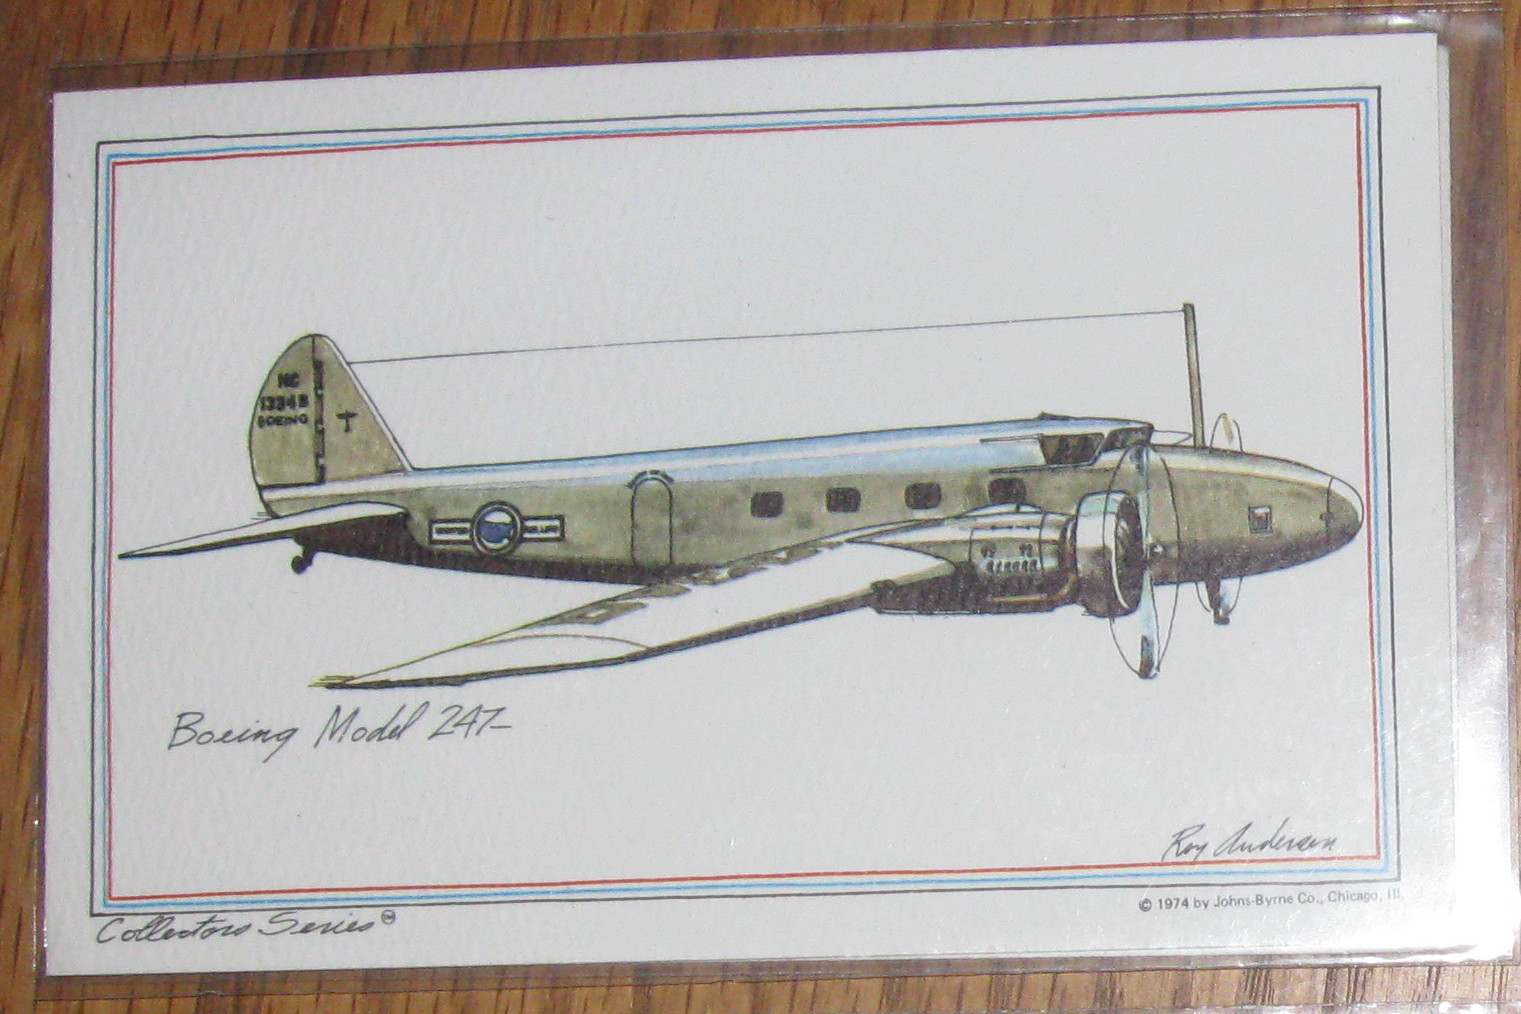 Boeing Model 247 collector series United